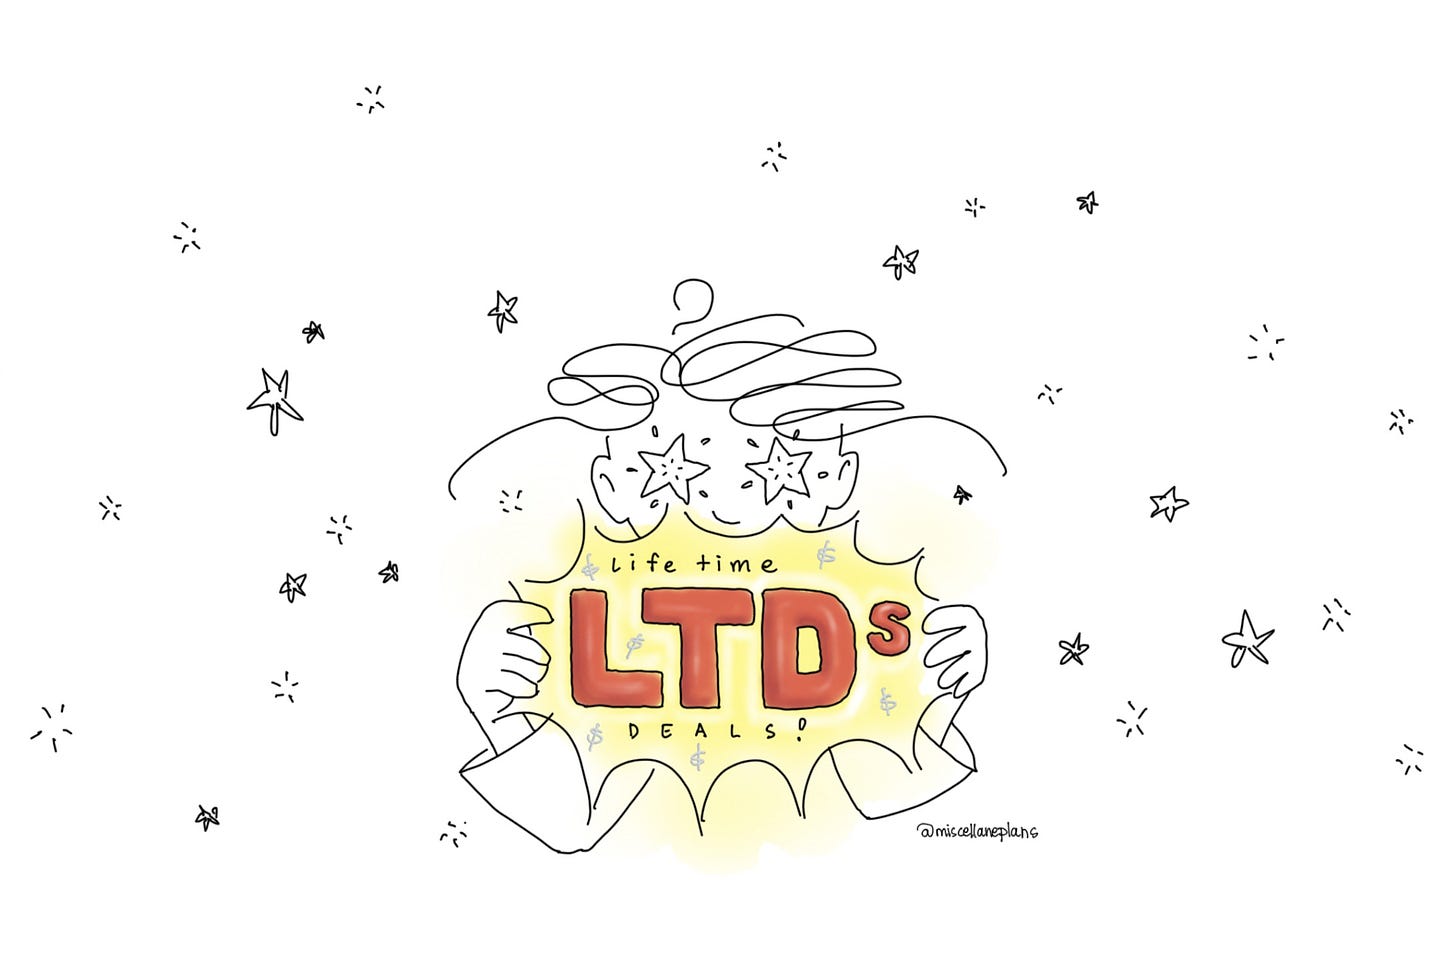 Black line drawing on white background showing a character with stars instead of eyes holding a glowing sign that reads LTDs — Lifetime Deals